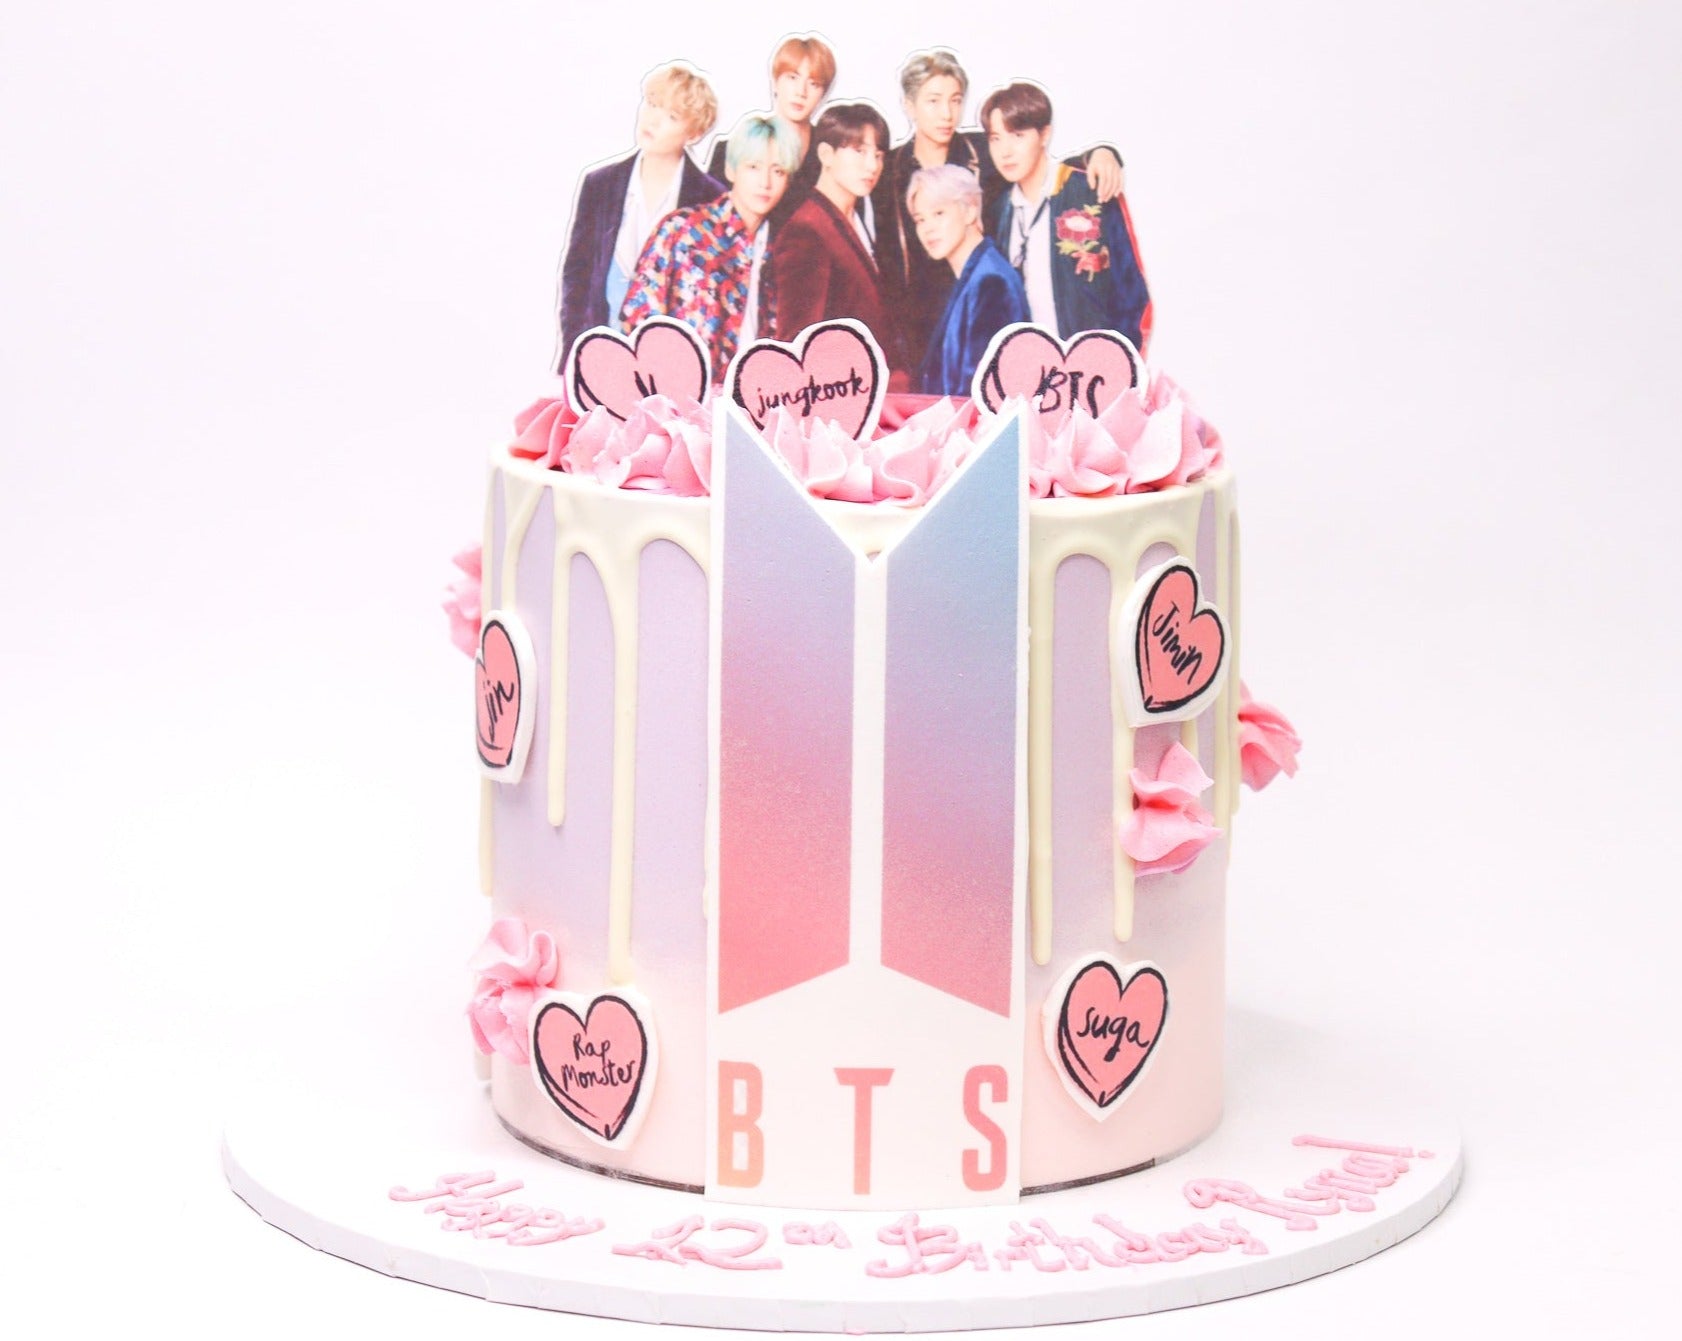 Top 17 Delicious BTS Cake Ideas Online by mymandap1 - Issuu